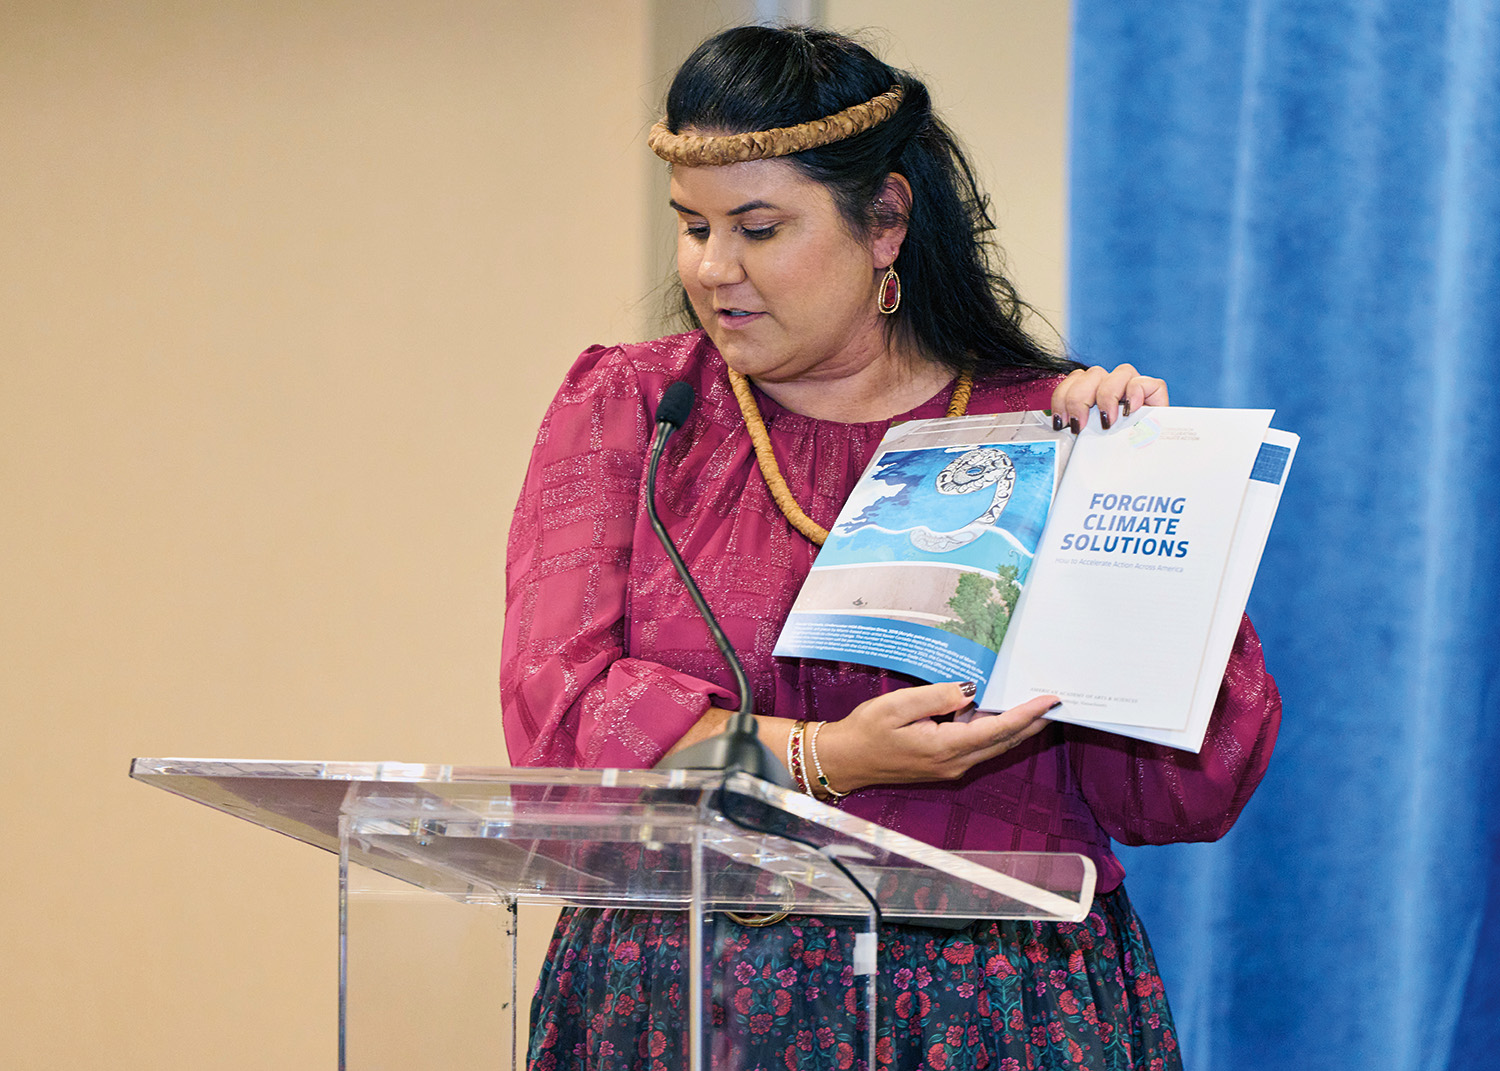 A woman standing at a podium holding open a report to show an image to the audience.